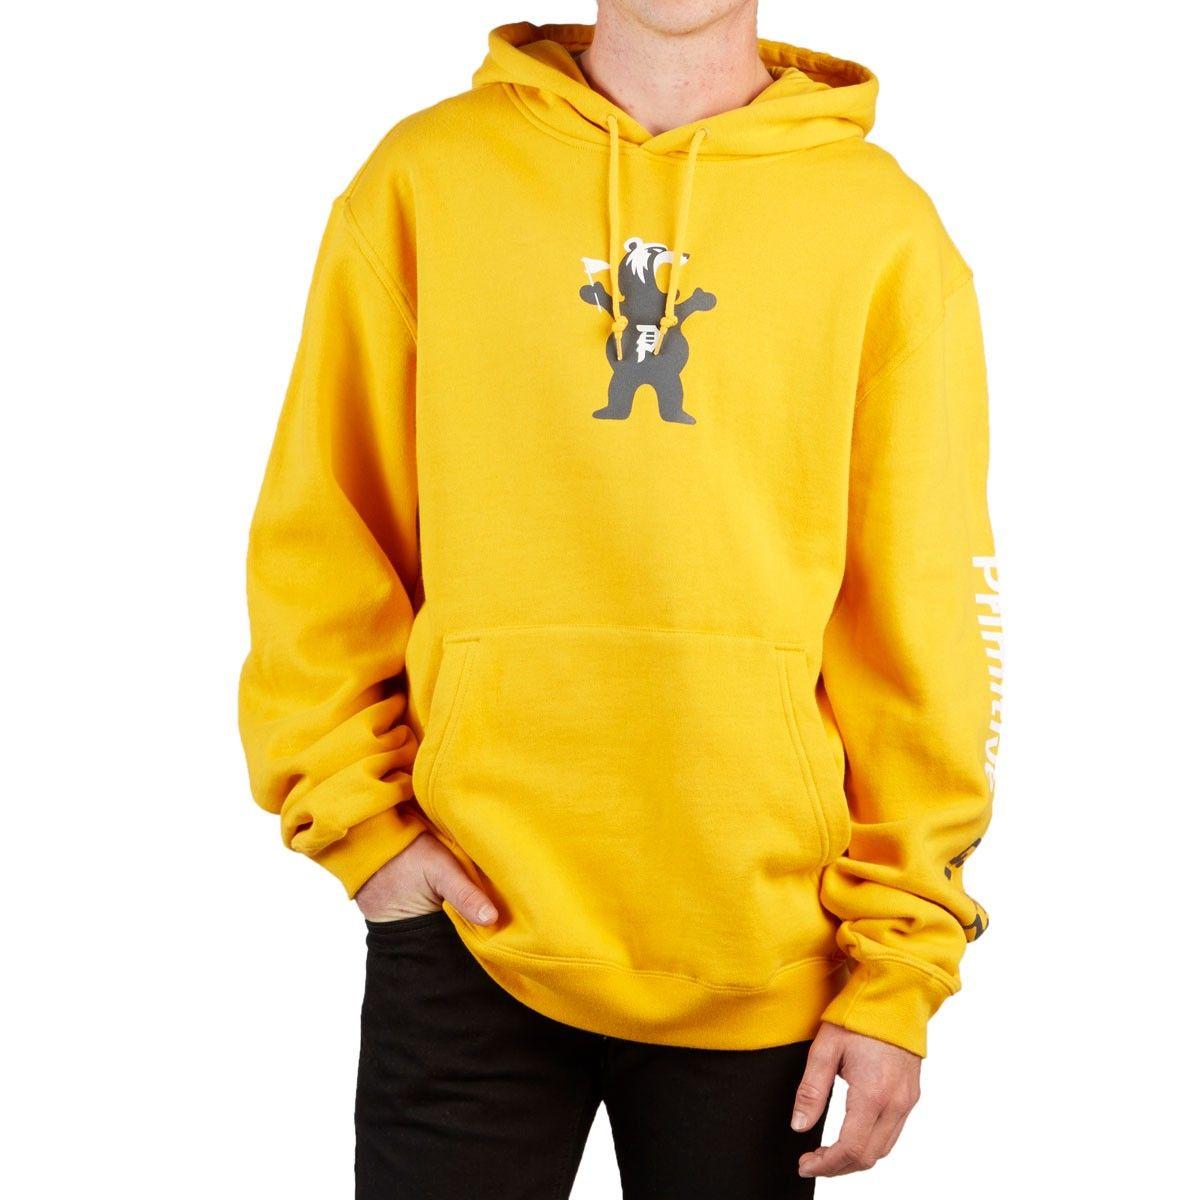 Primitive Grizzly Logo - Primitive X Grizzly Mascot Hoodie - Yellow